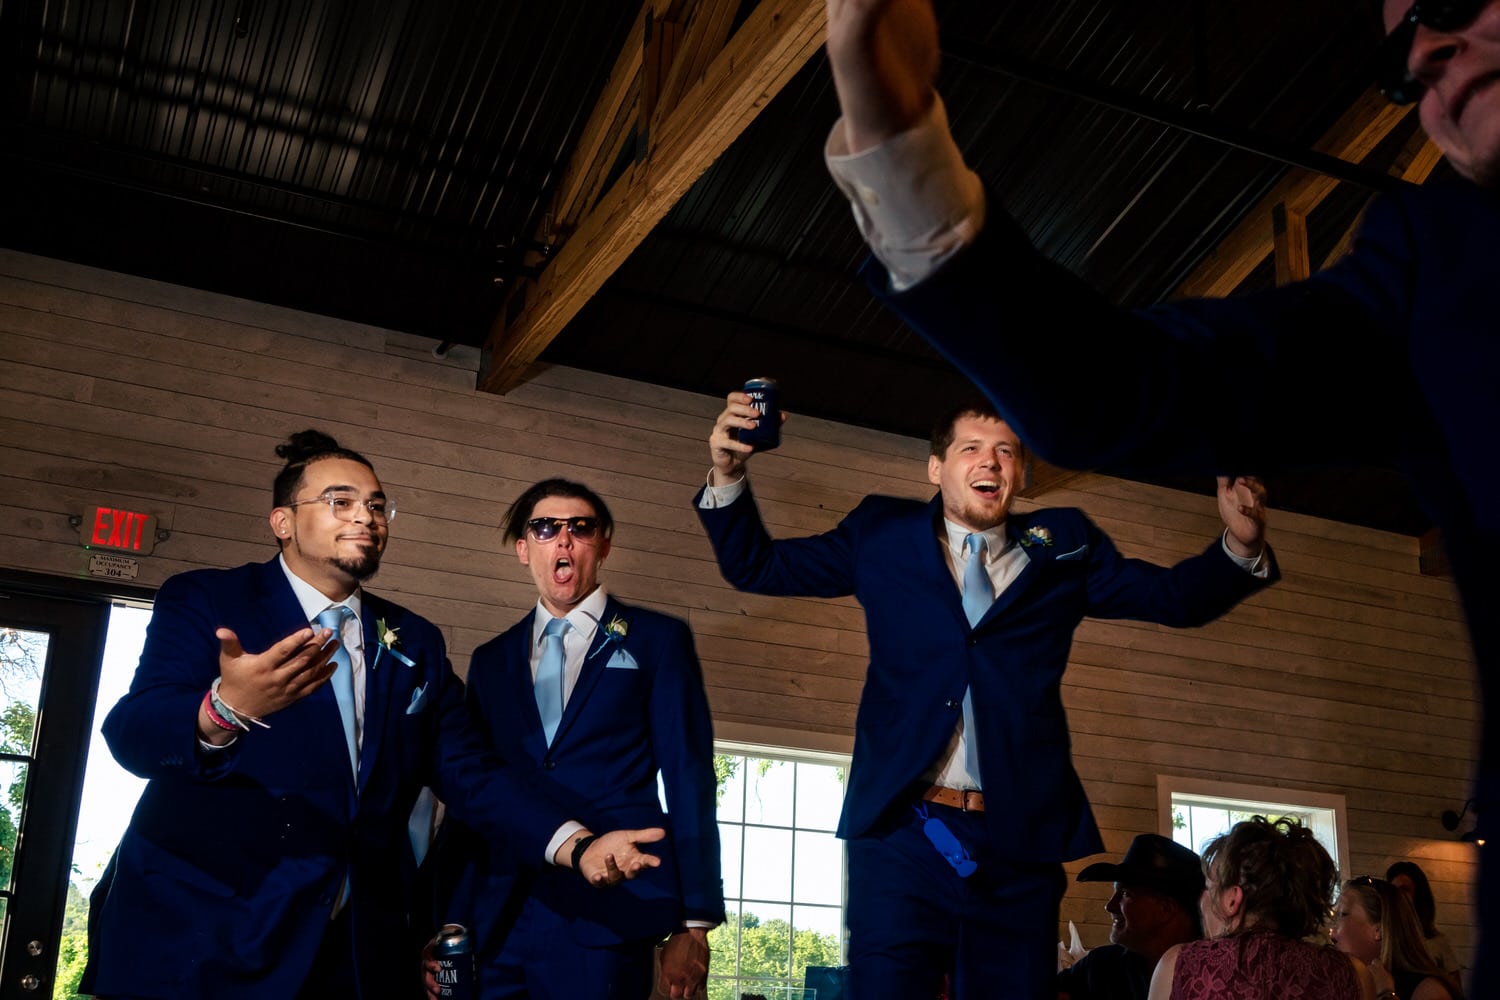 A candid, colorful picture of group of groomsmen entering a wedding reception, jumping in celebration. 